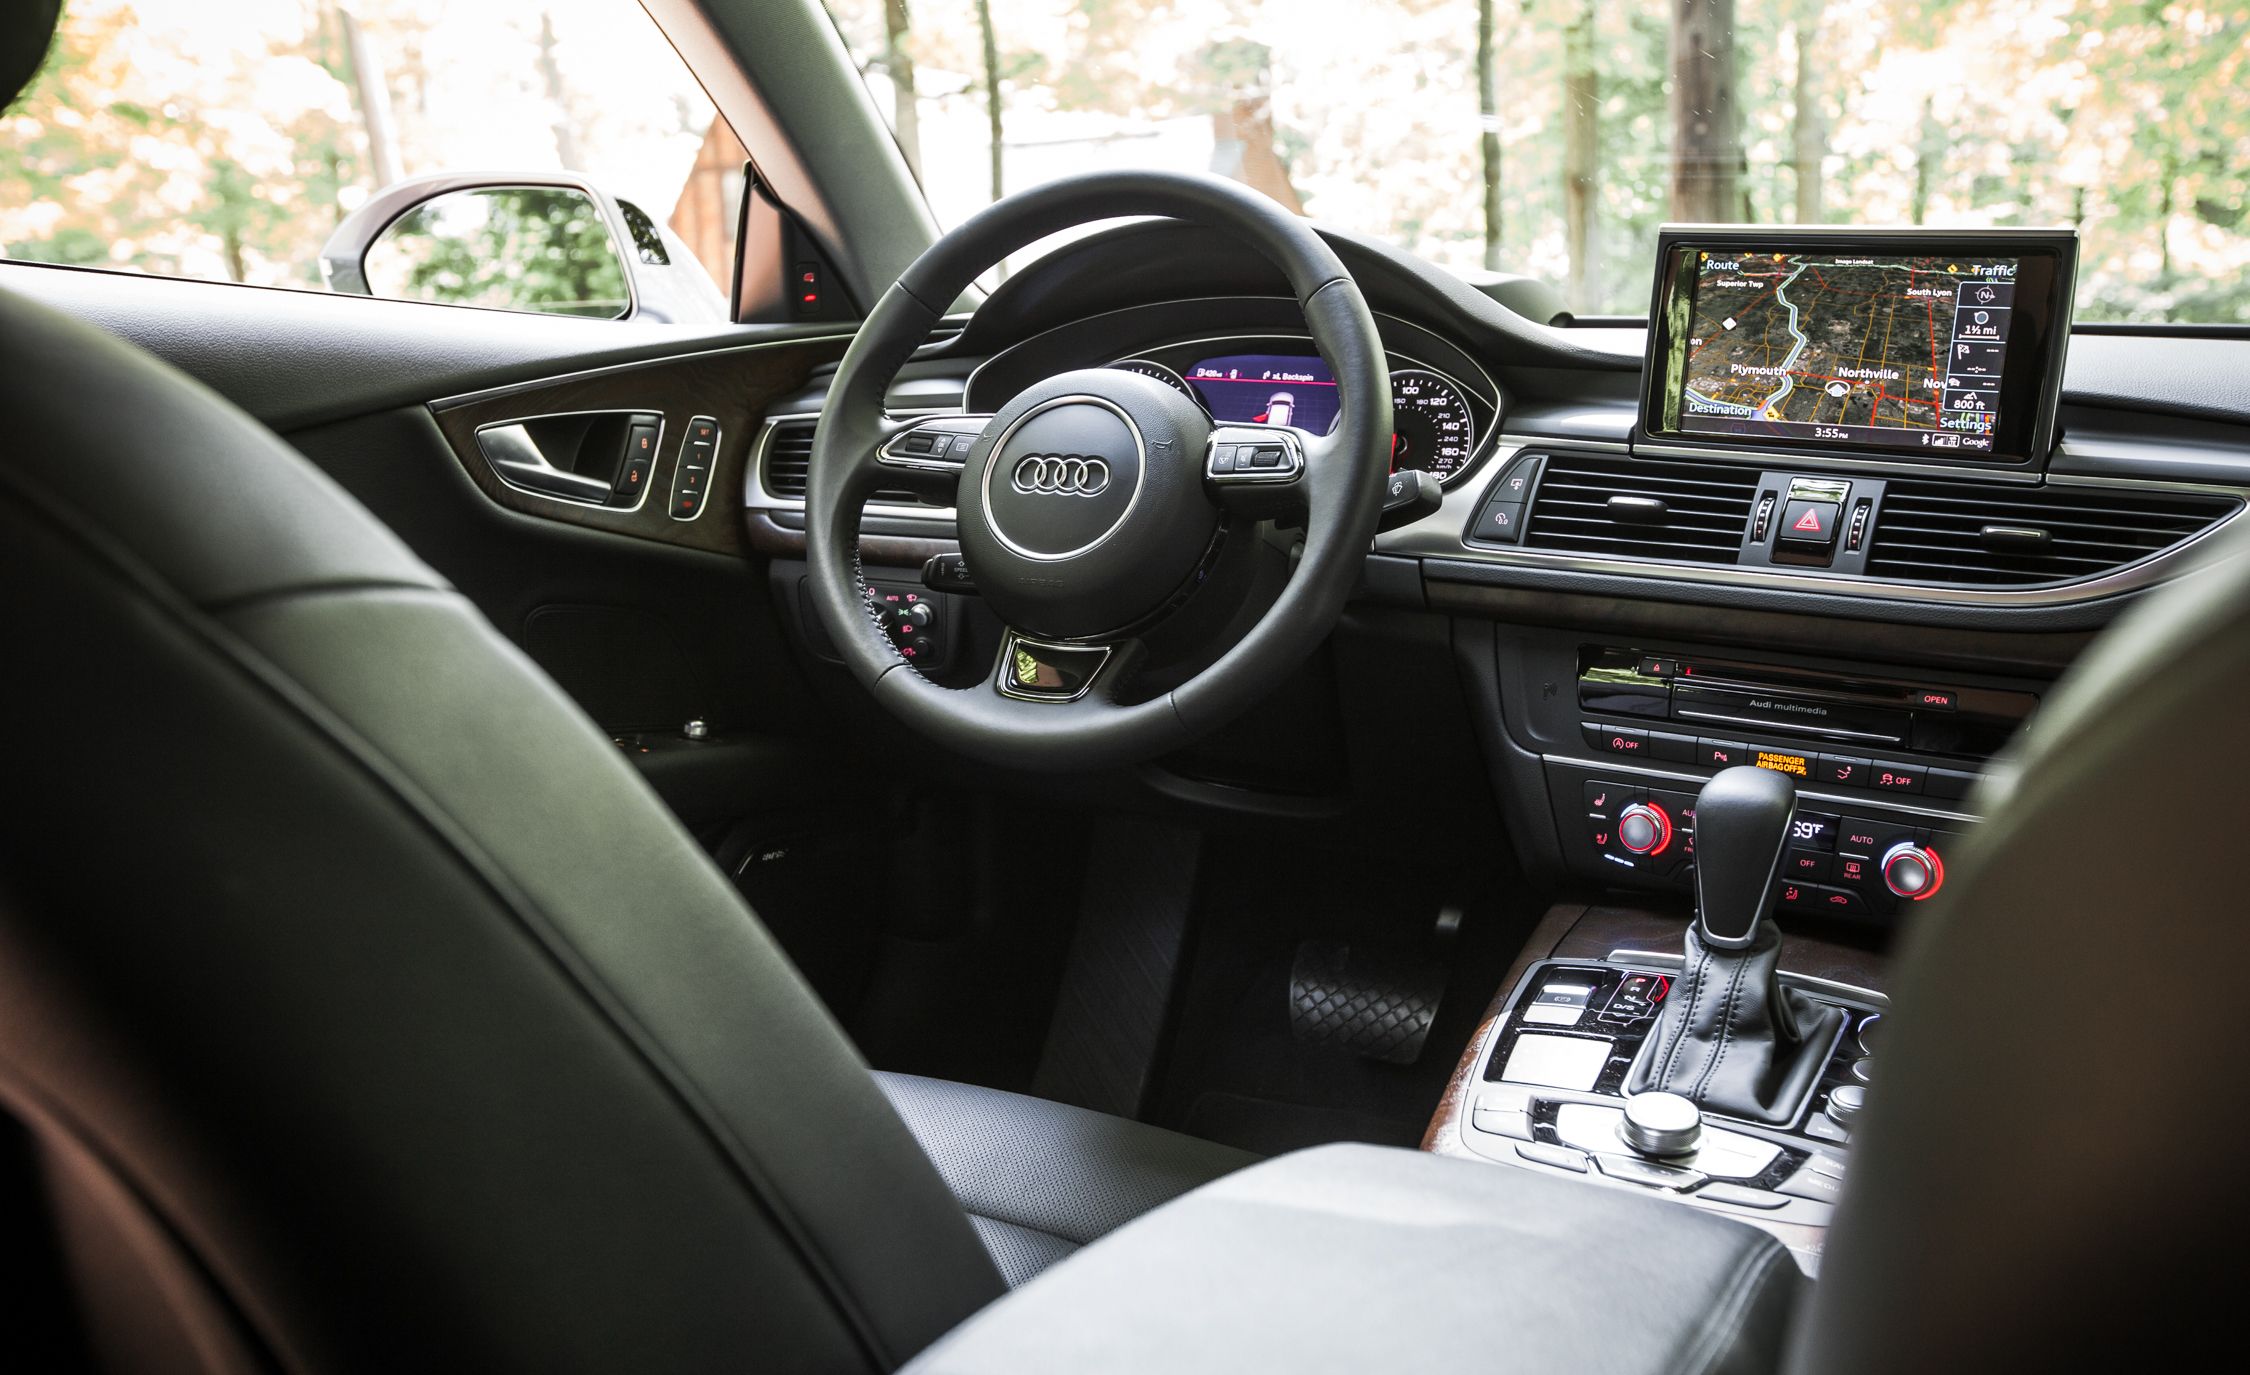 2016 Audi A7 Interior View Head Unit And Dash (View 11 of 26)